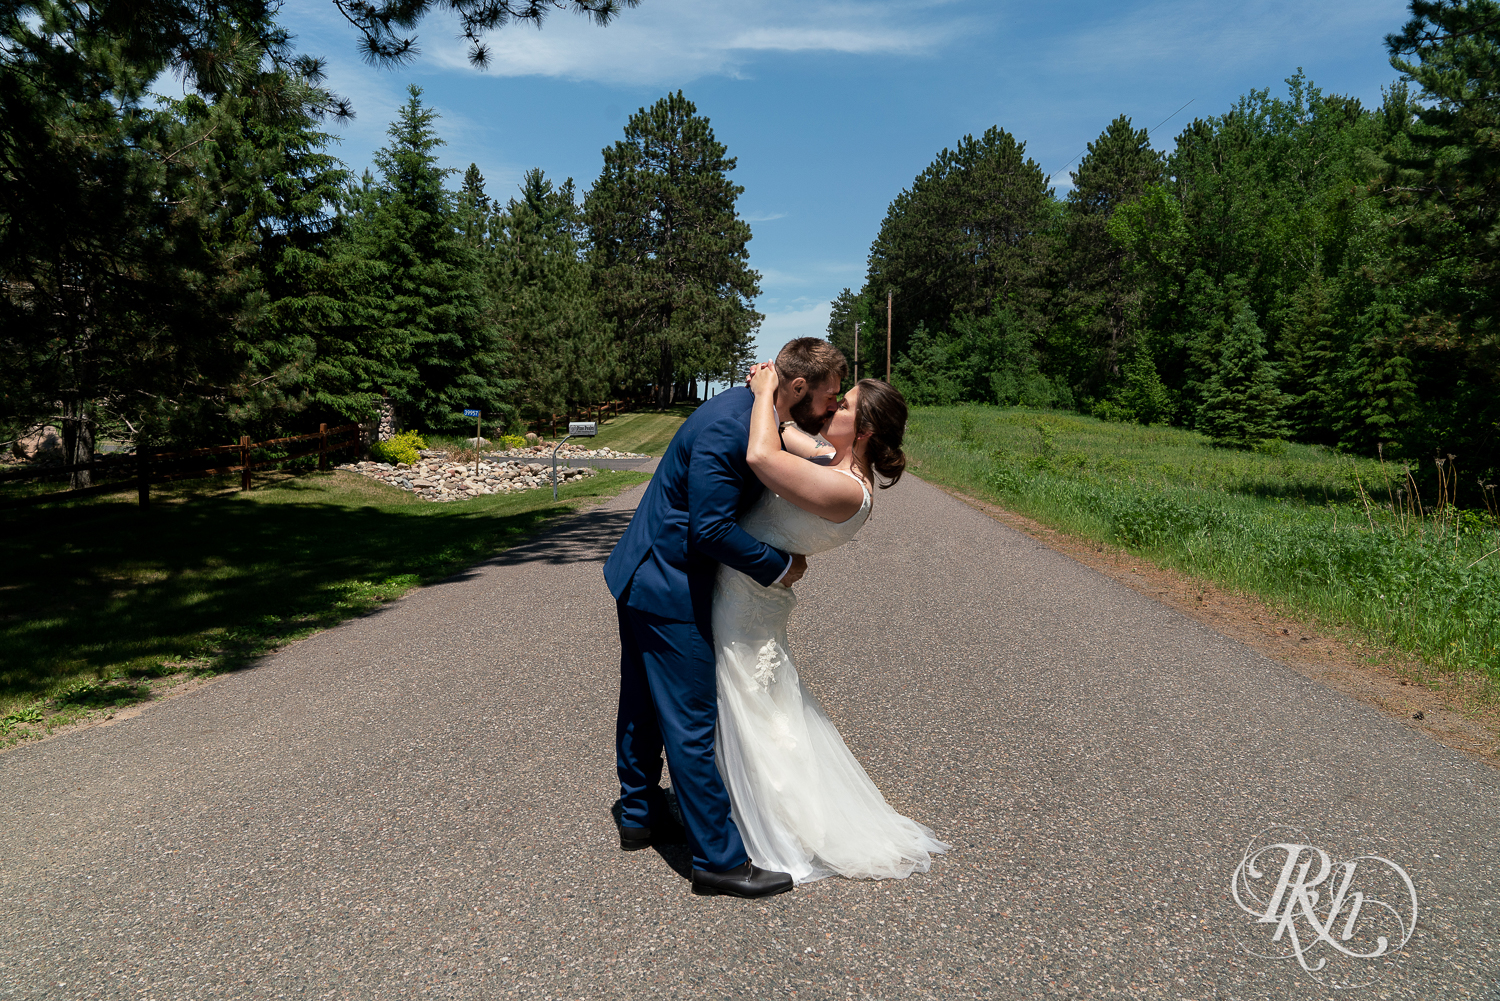 Bride and groom kiss in road at Pine Peaks Event Center in Pine River, Minnesota.